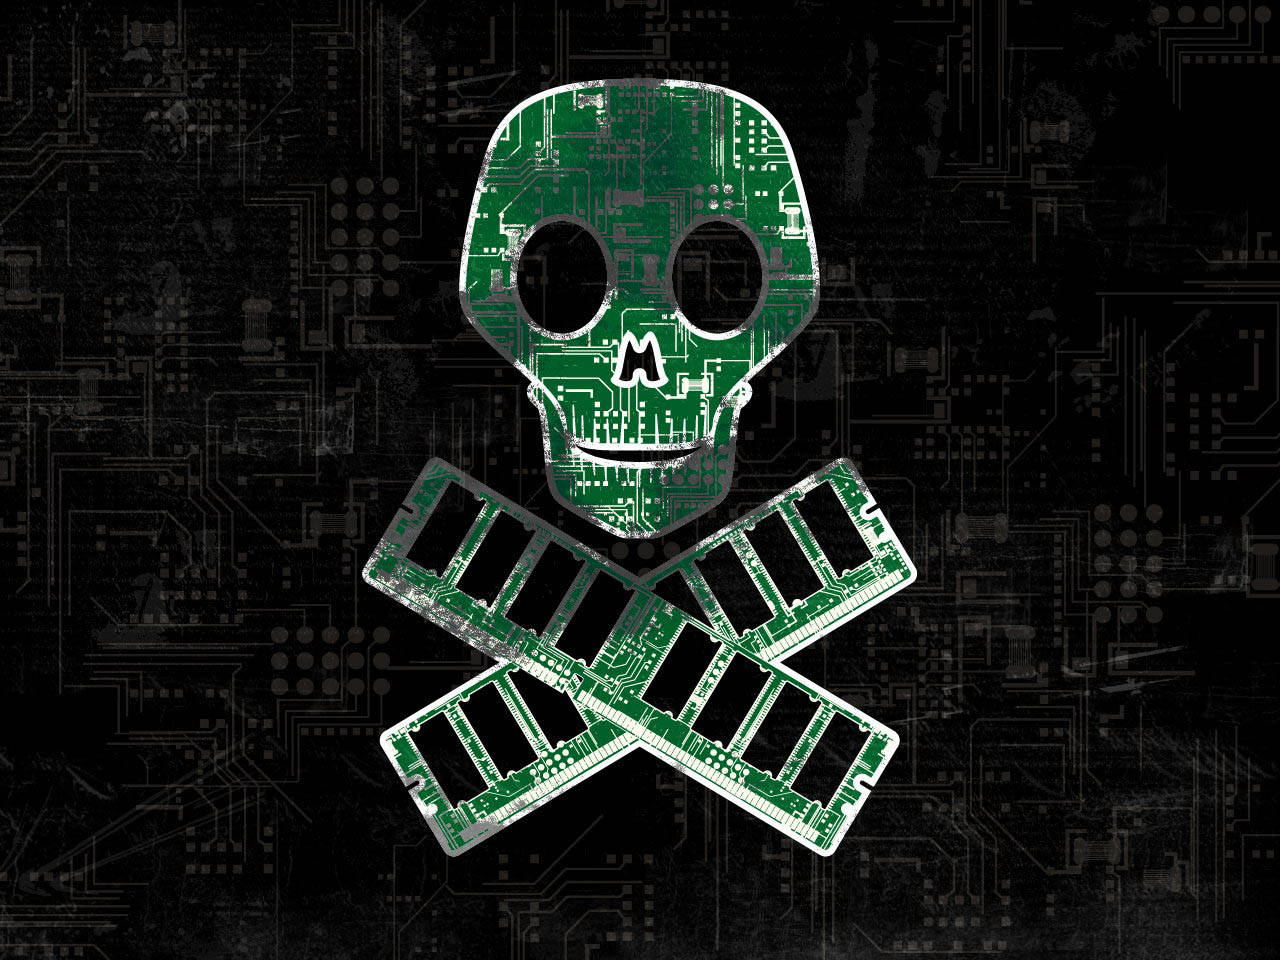 “a Hacker’s Calling Card – A Poison Skull Symbolizes Disruption”